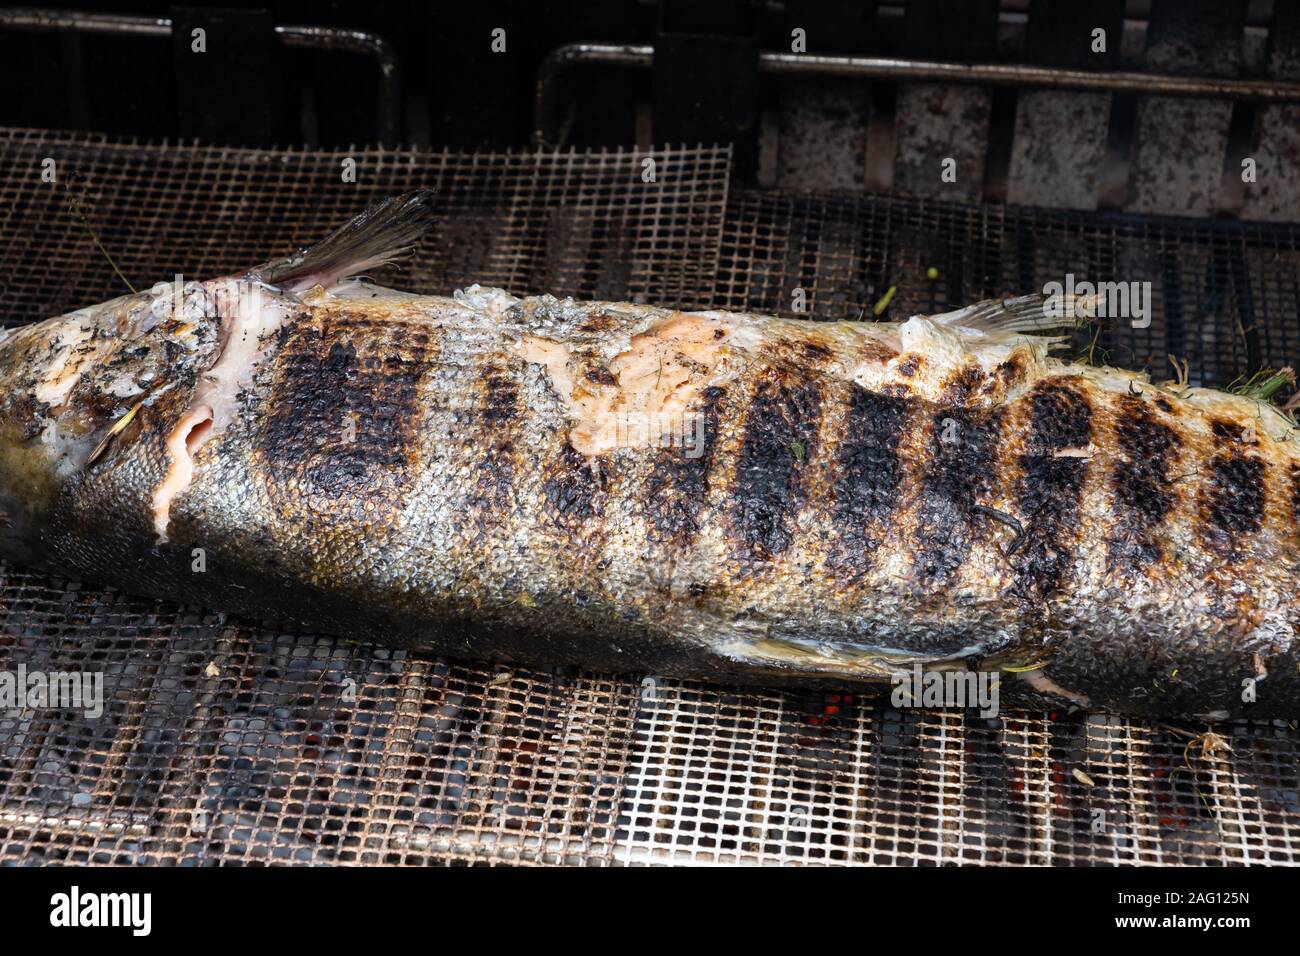 salmon stuffed with herbs grilling on the barbecue Stock Photo